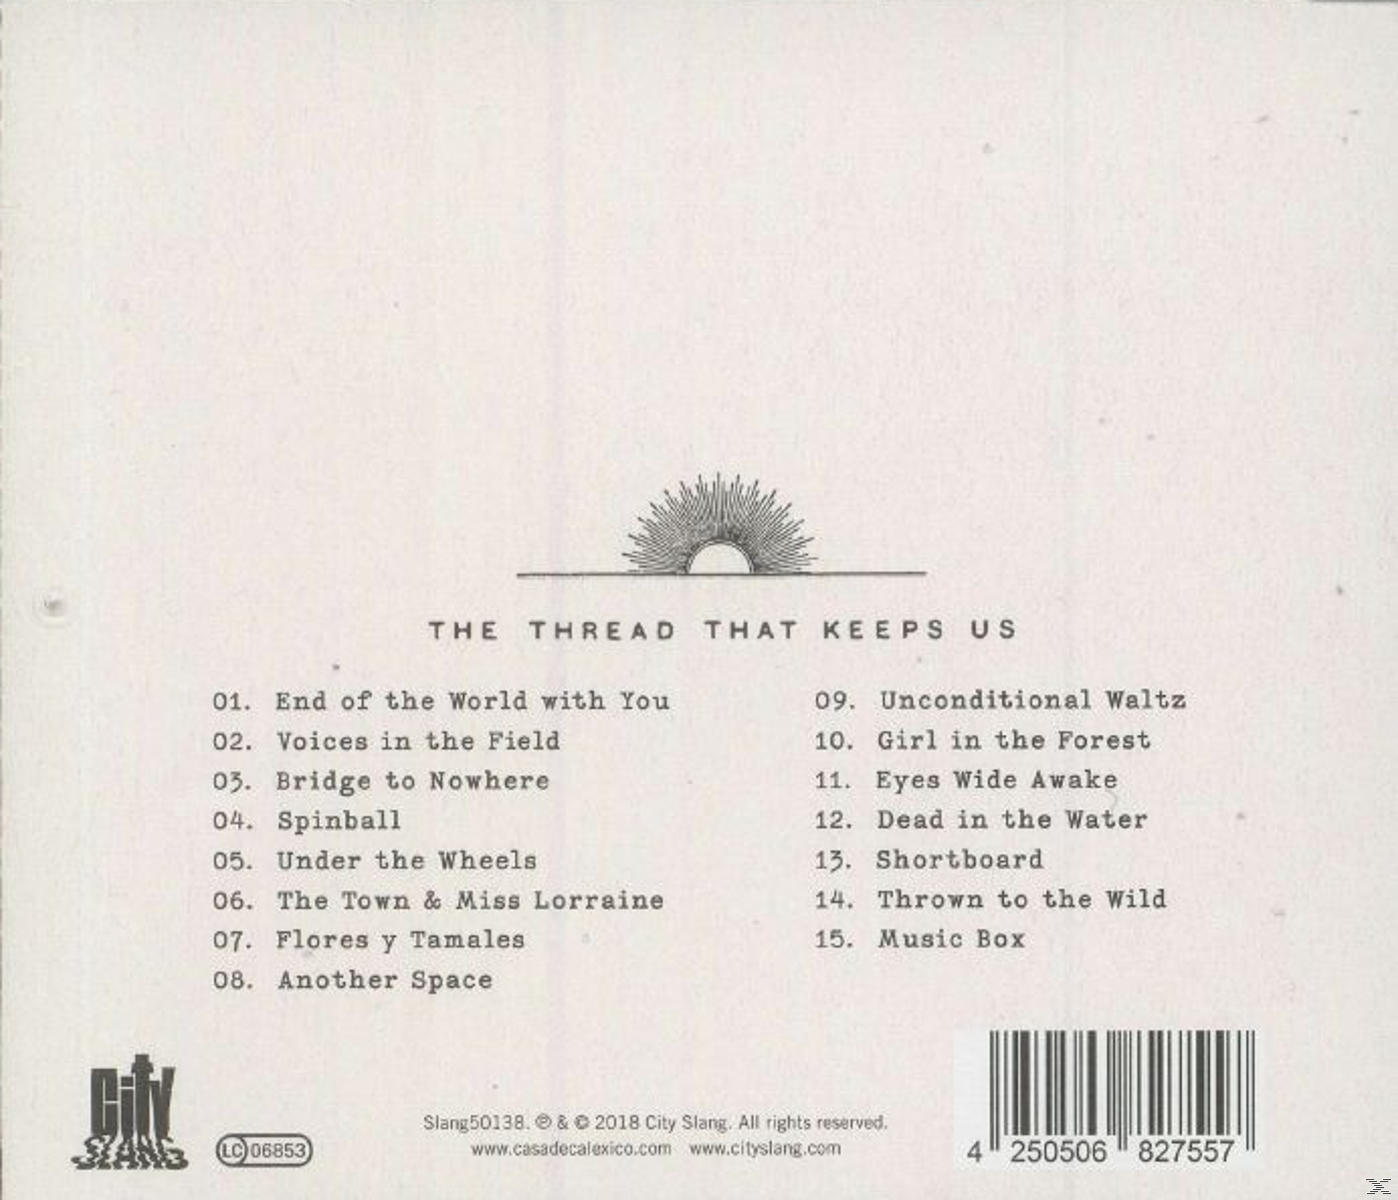 - Keeps - That (CD) Calexico Us Thread The